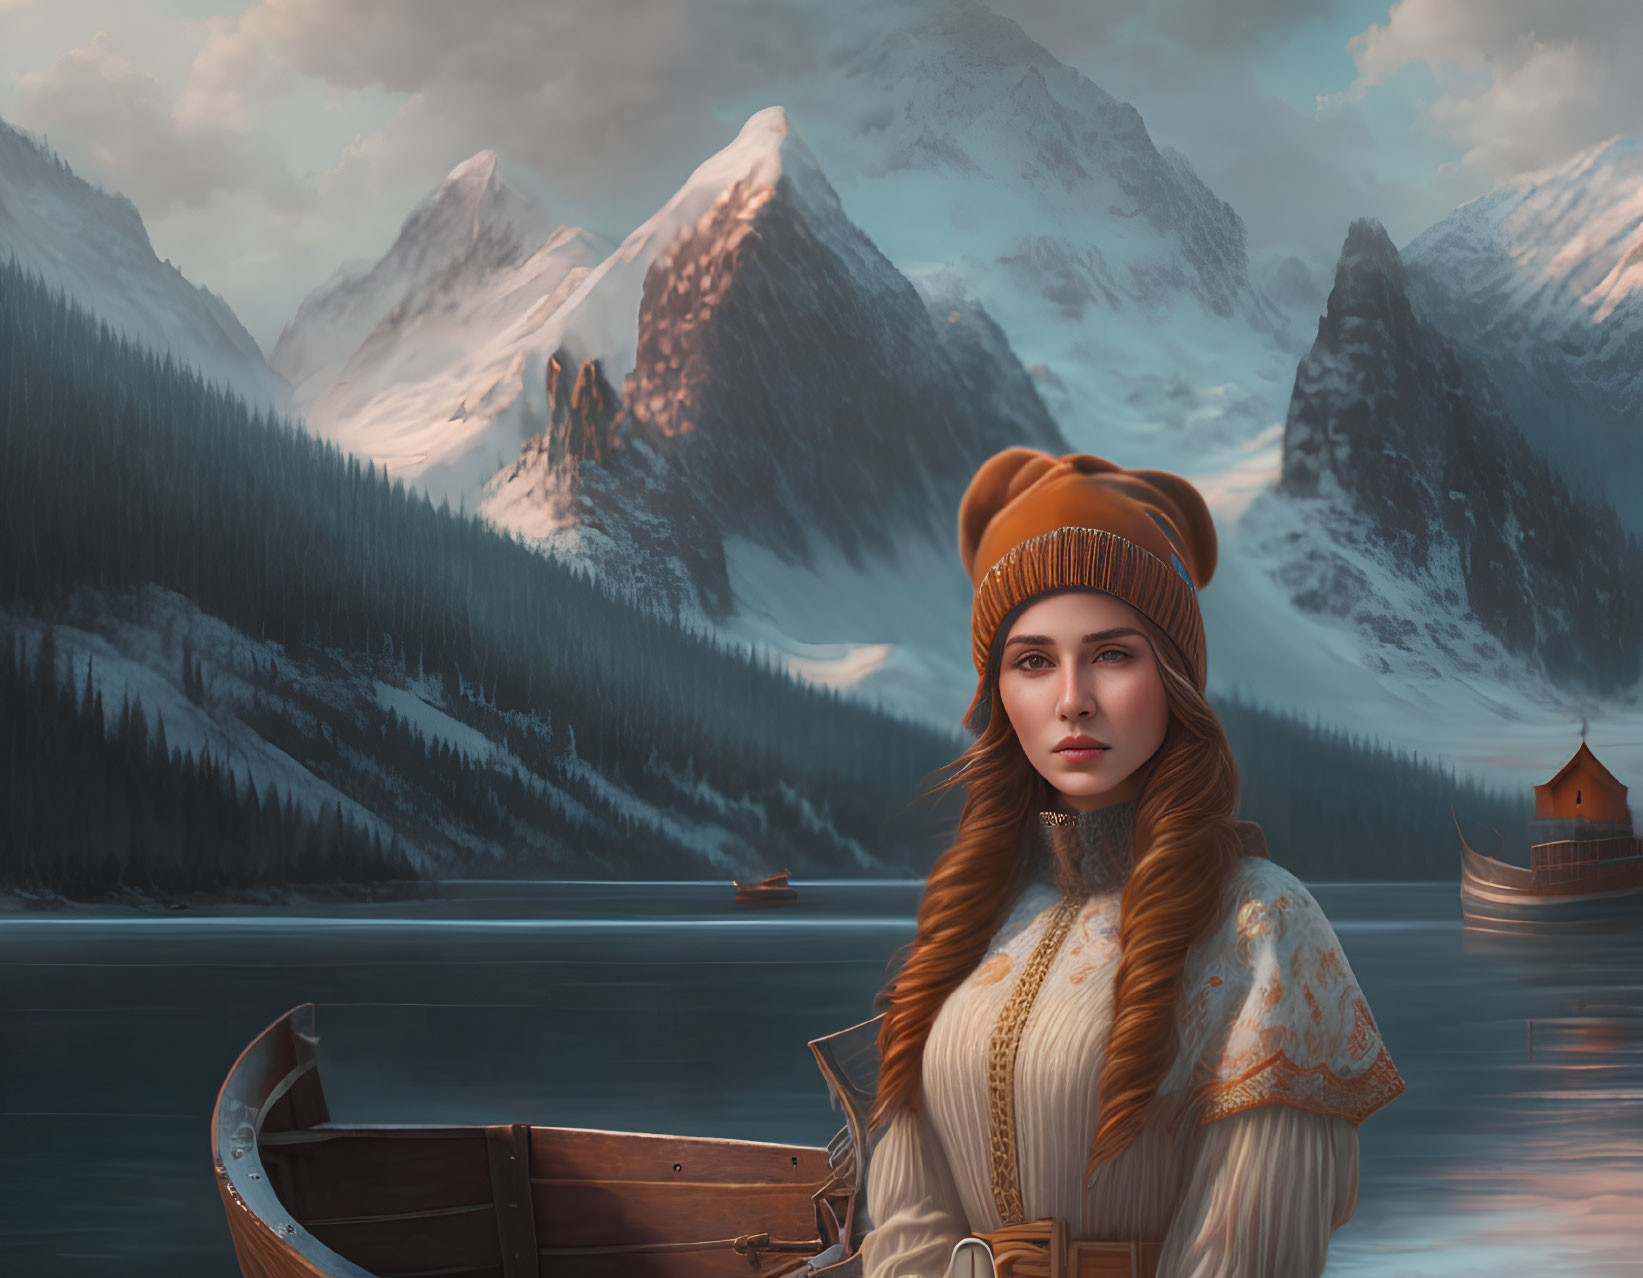 Woman in warm hat on boat with snow-capped mountains & misty lake